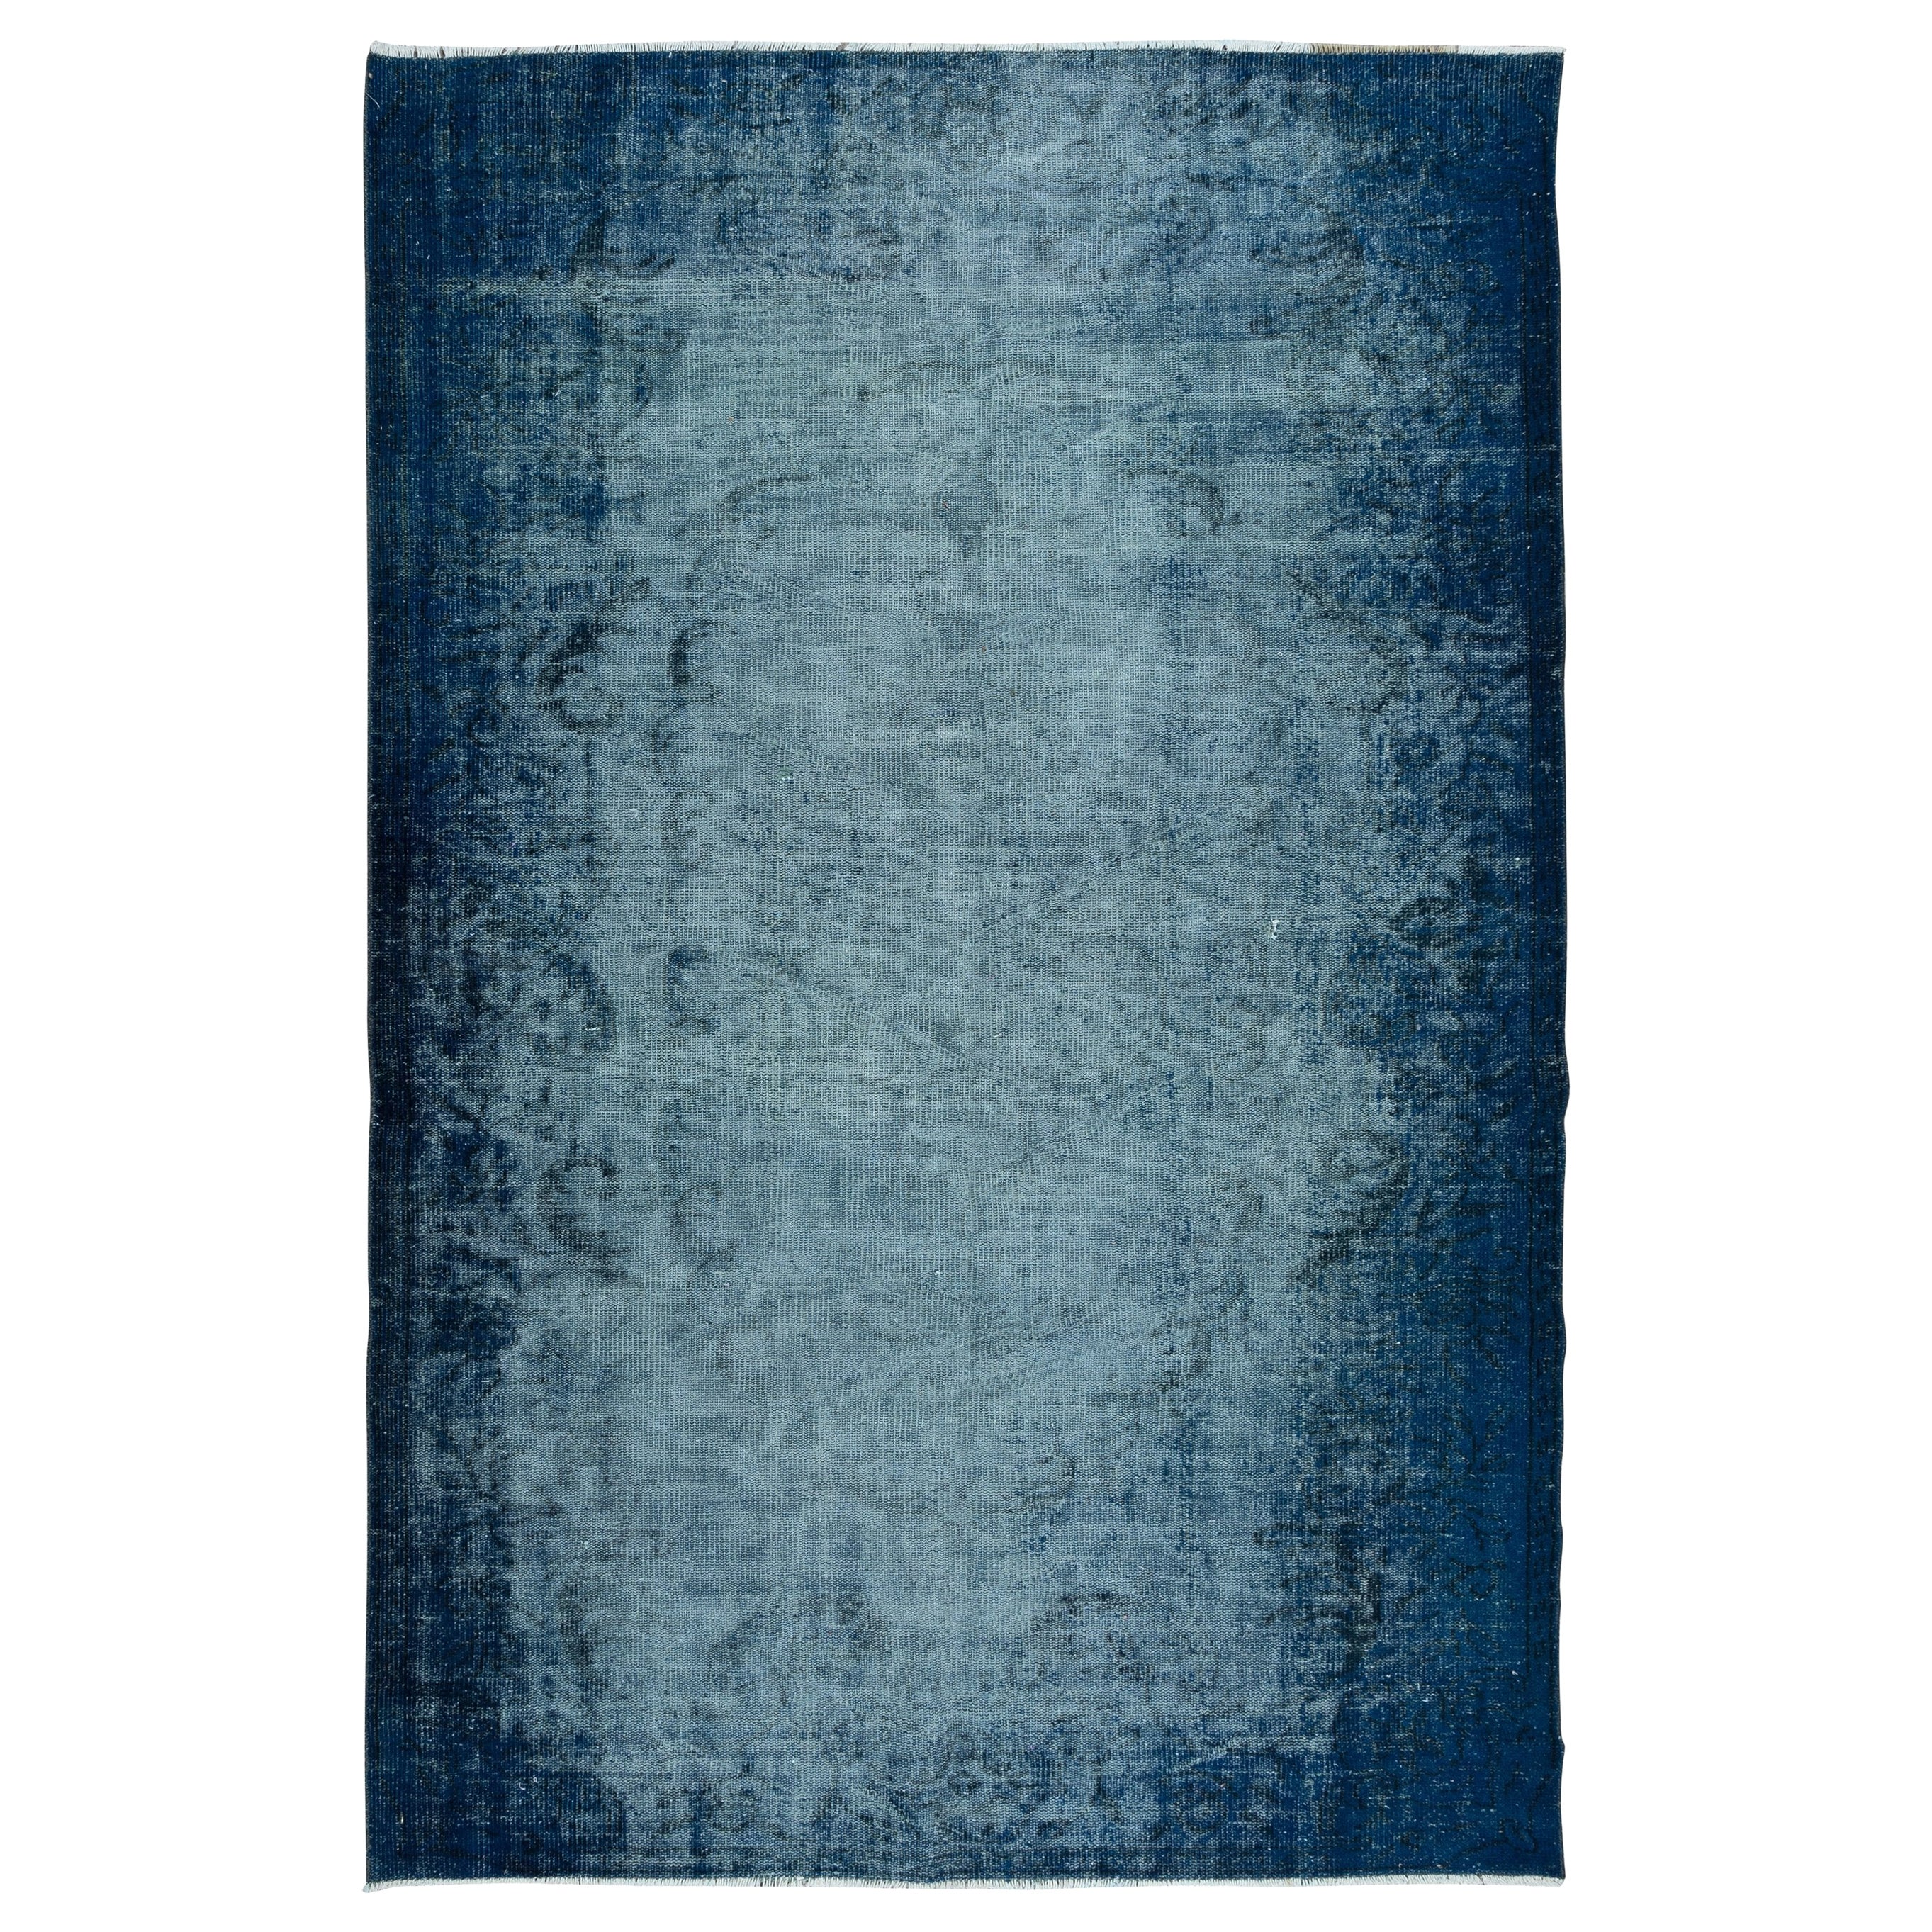 5.8x9 Ft Distressed Handmade Navy Blue Area Rug, Shabby Chic Turkish Carpet For Sale